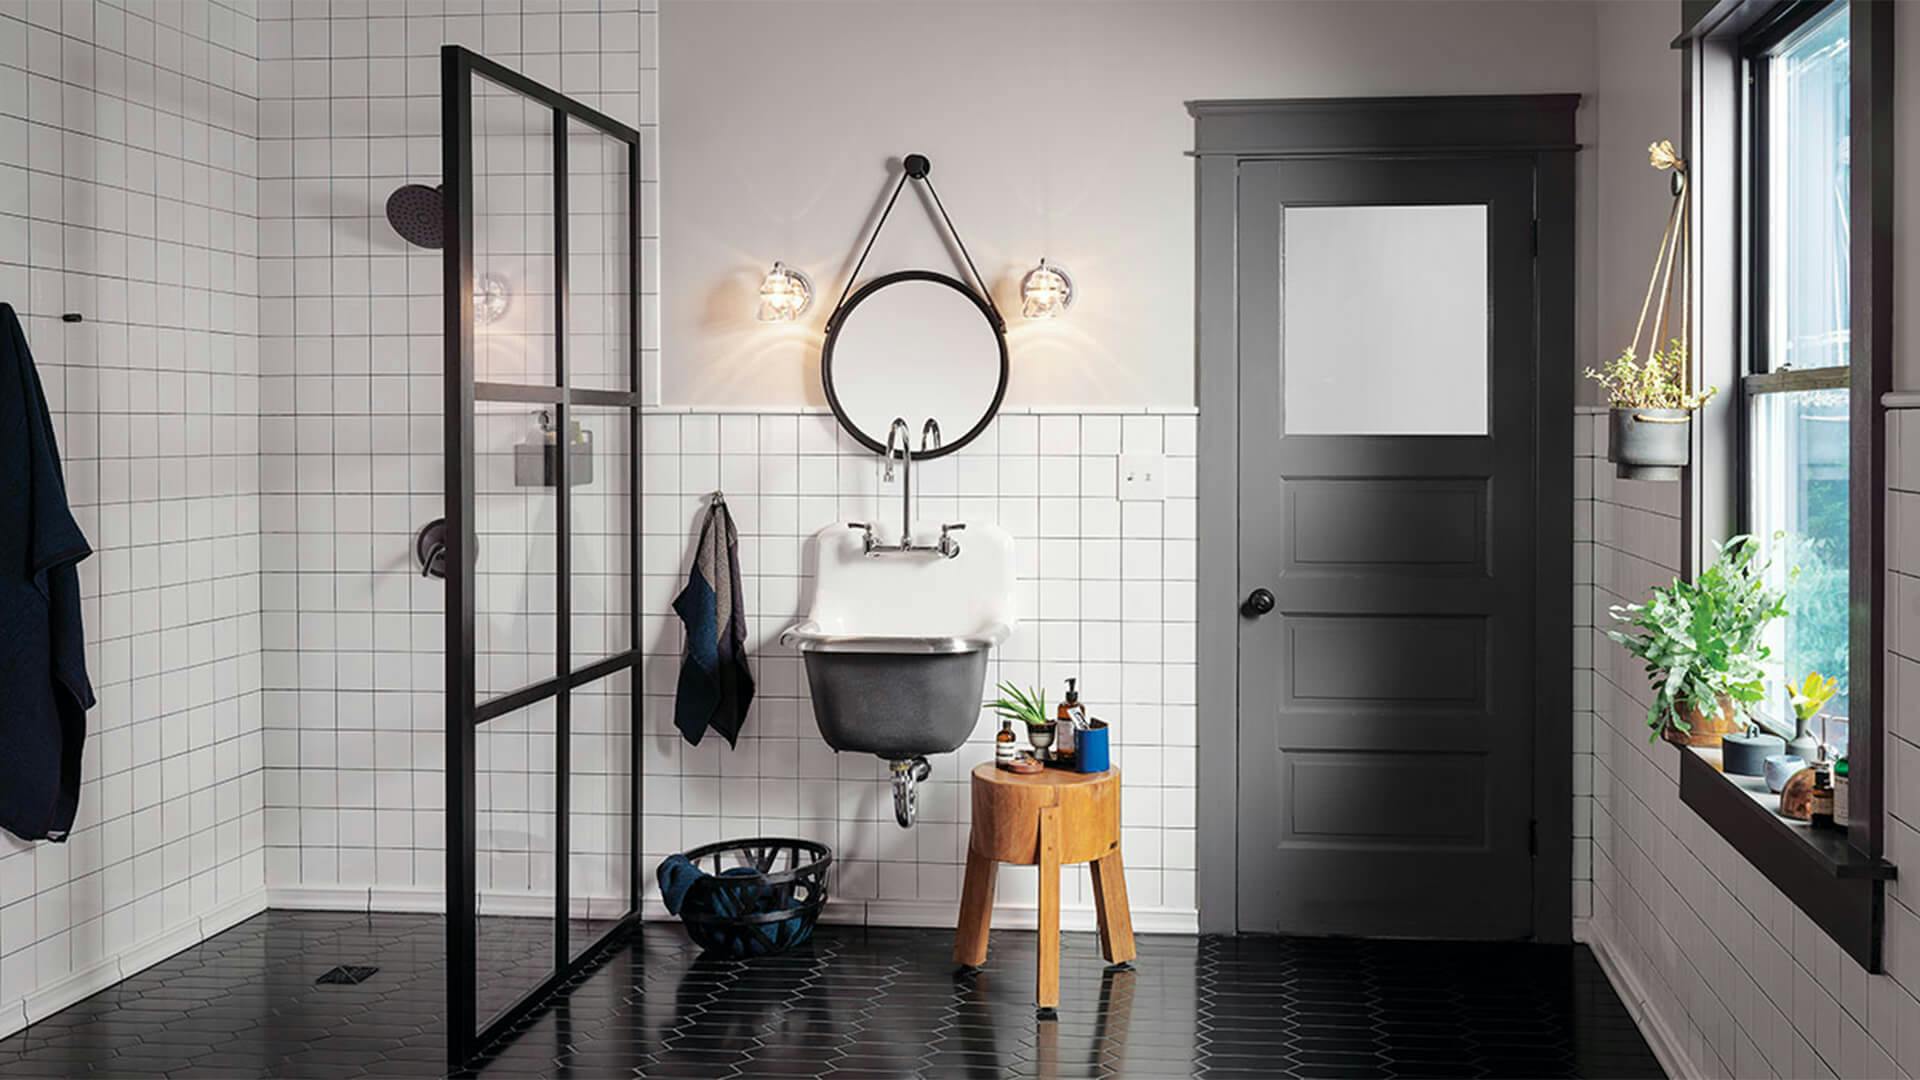 A modern bathroom lit with Talland vanity lights above an industrial style bathroom sink in the daytime 